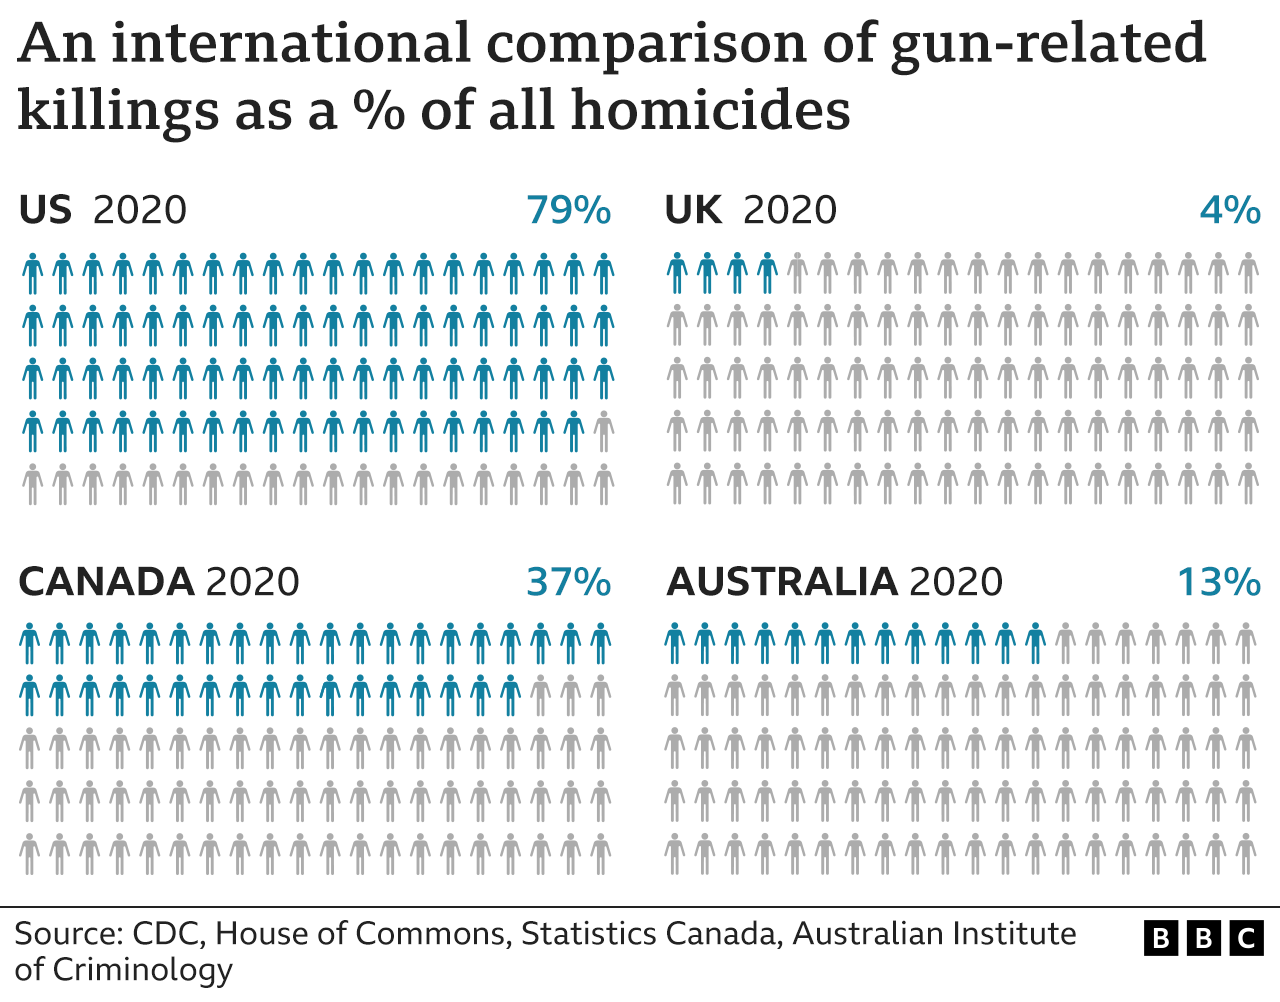 Graphic showing an international comparison of gun-related killings as a percentage of all homicides in each country. The US leads with nearly 79% of all homicides occurring with guns.